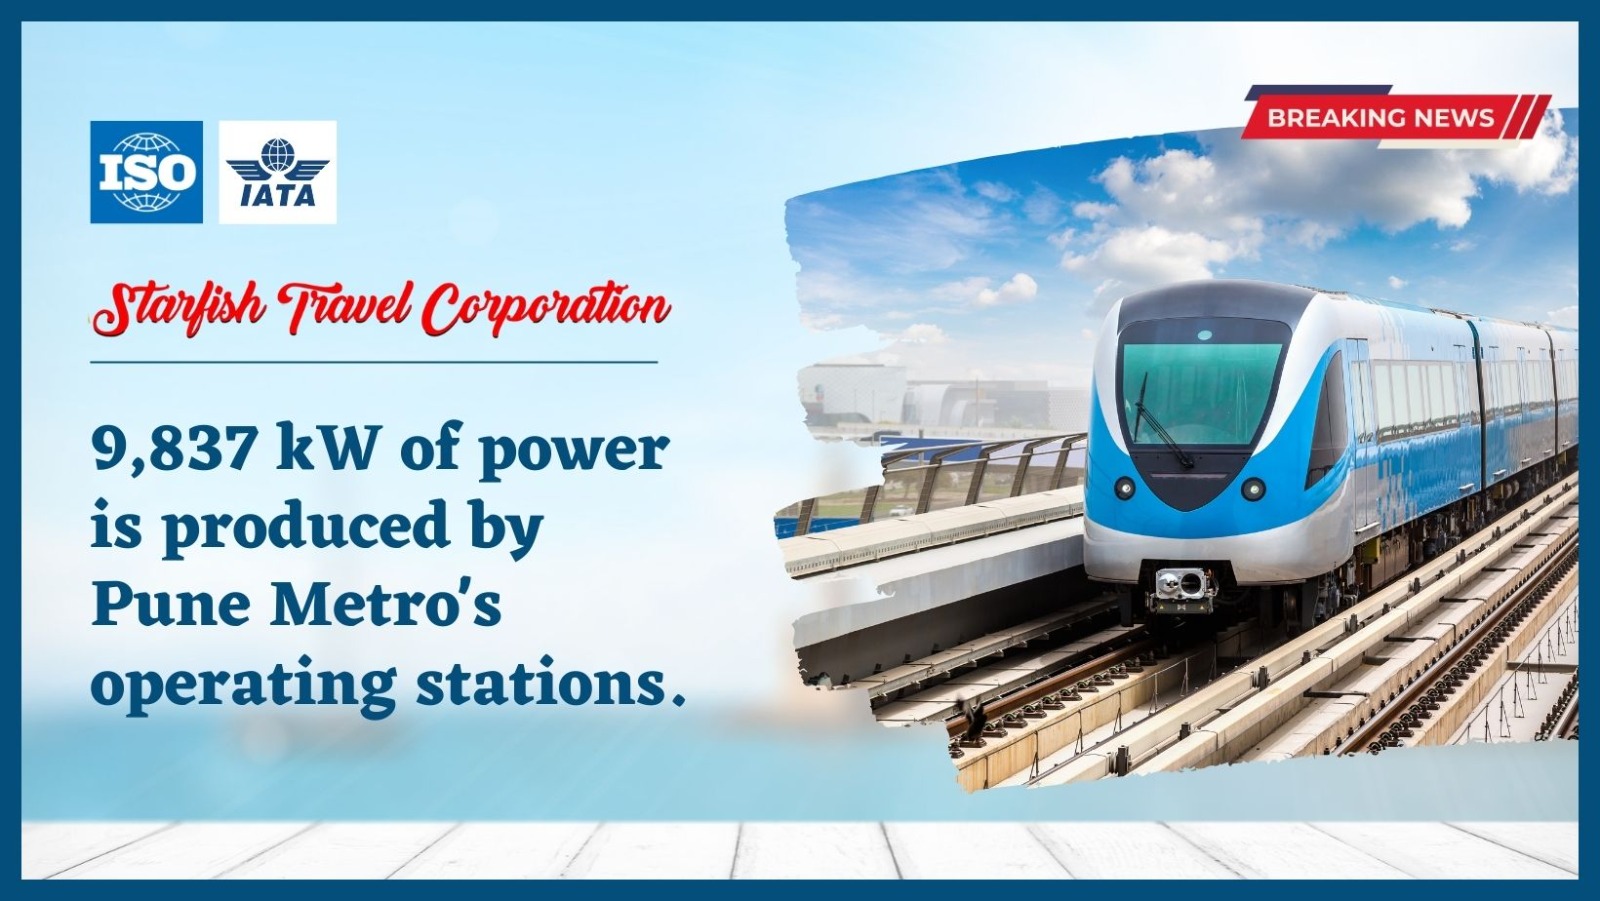  9,837 kW of power is produced by Pune Metro’s operating stations.